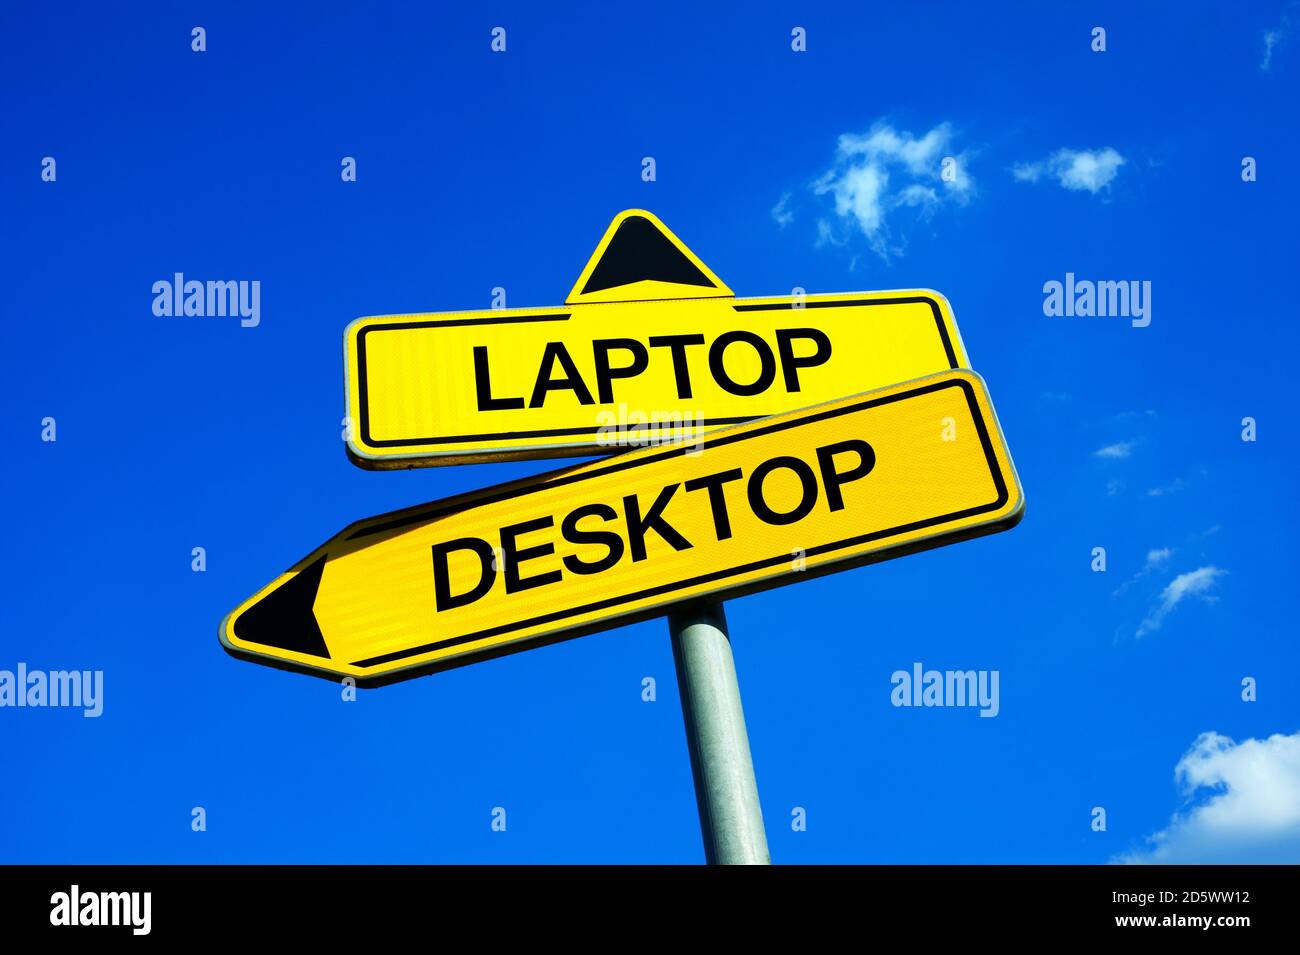 Laptop vs Desktop - Traffic sign with two options - using unportable personal computer or working on portable and mobile notebook. Question of weight, Stock Photo